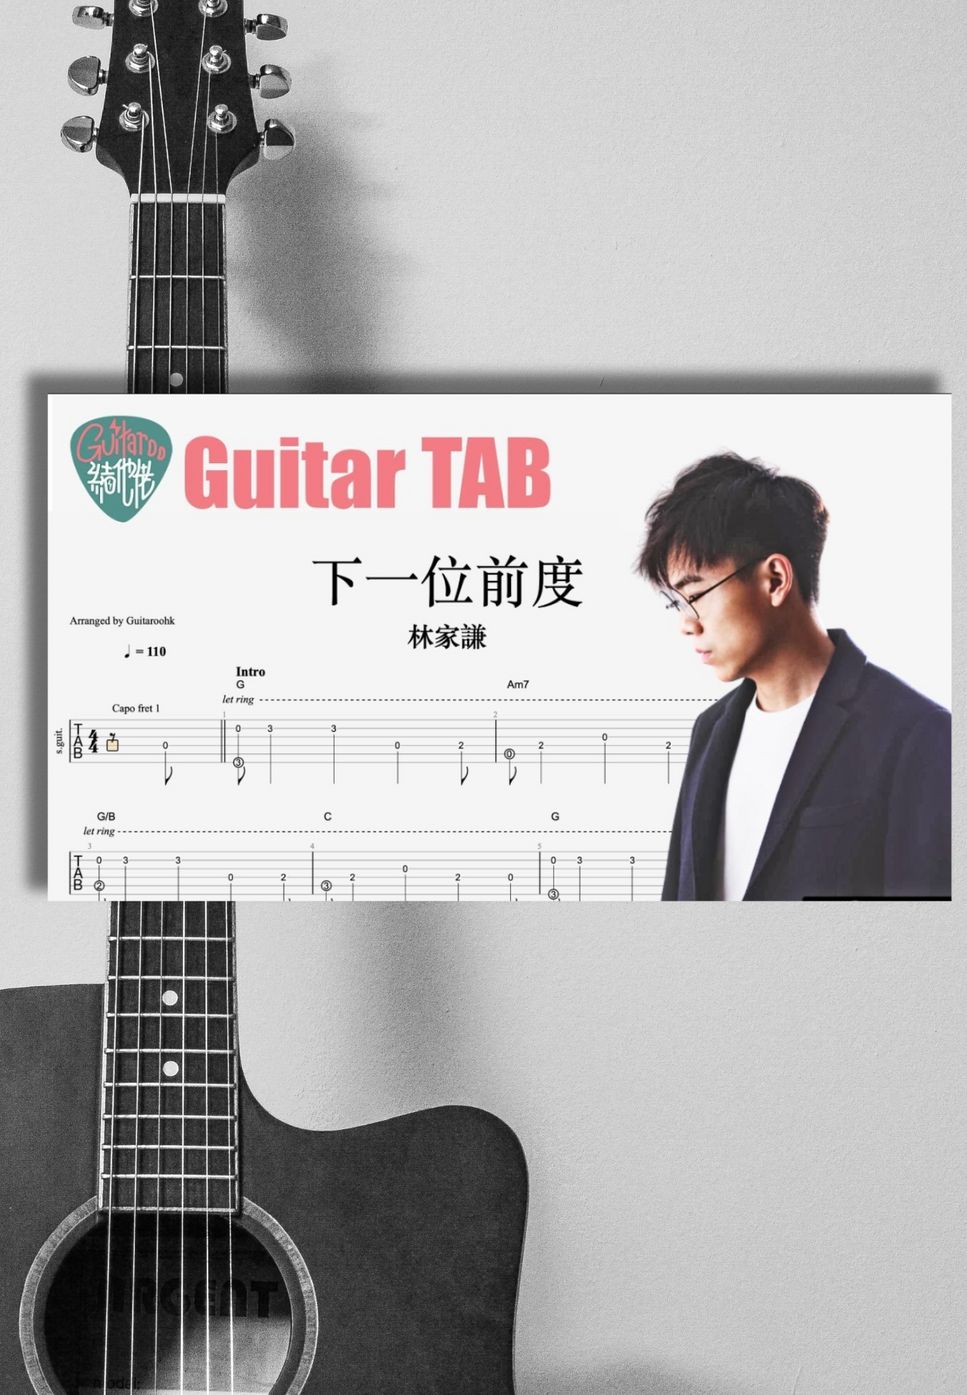 Terence Lam 林家謙 - 下一位前度 by Guitaroohk